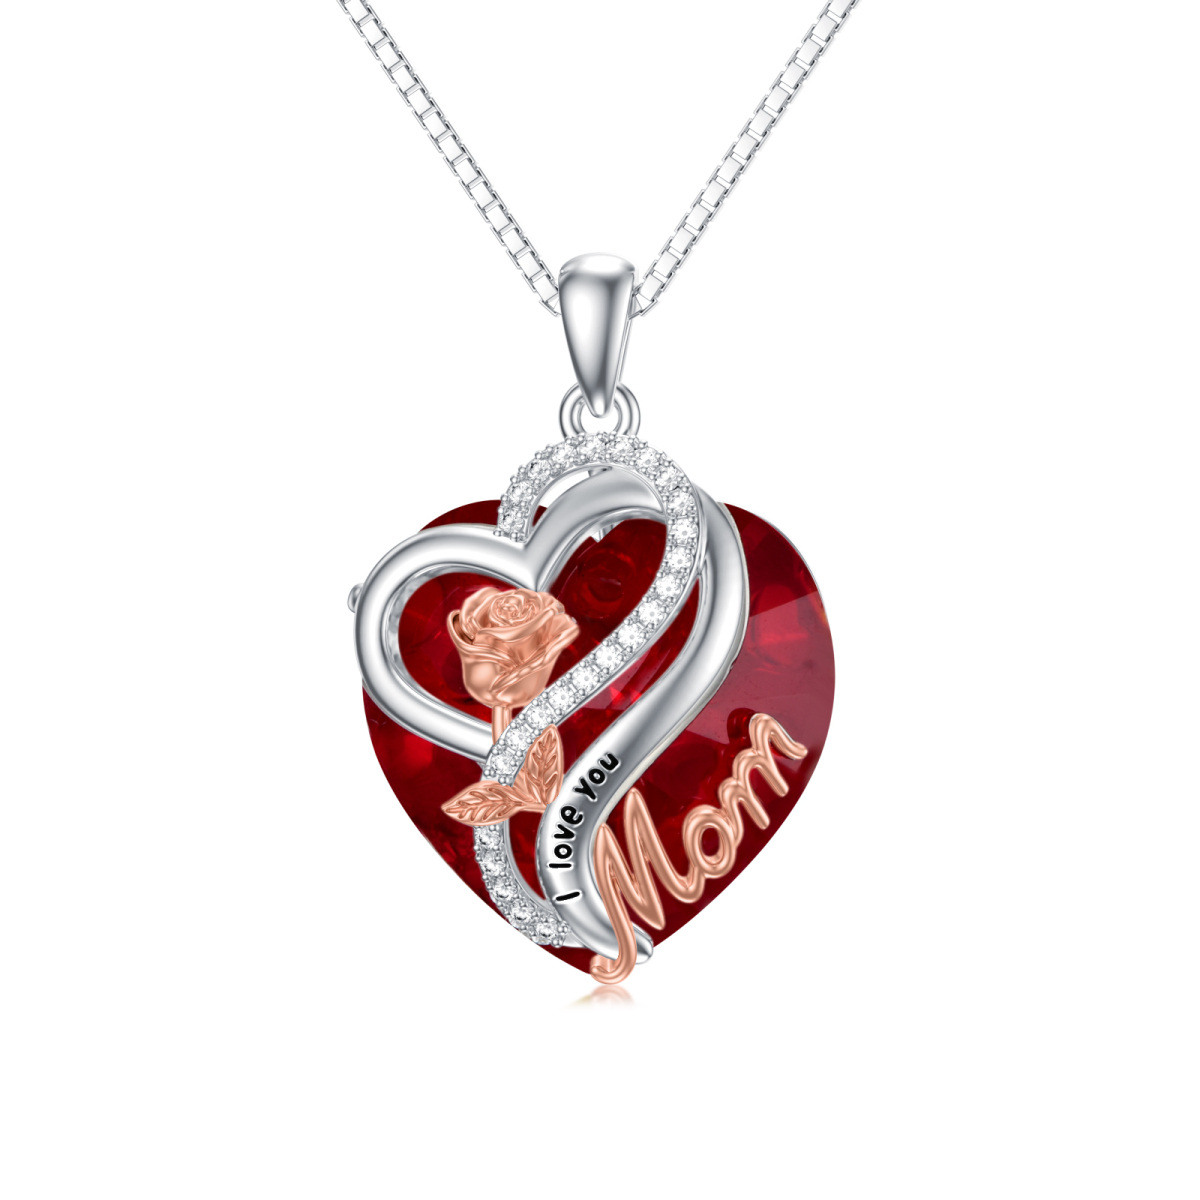 Sterling Silver Two-tone Heart Shaped Rose & Mother & Heart Crystal Pendant Necklace with Engraved Word-1